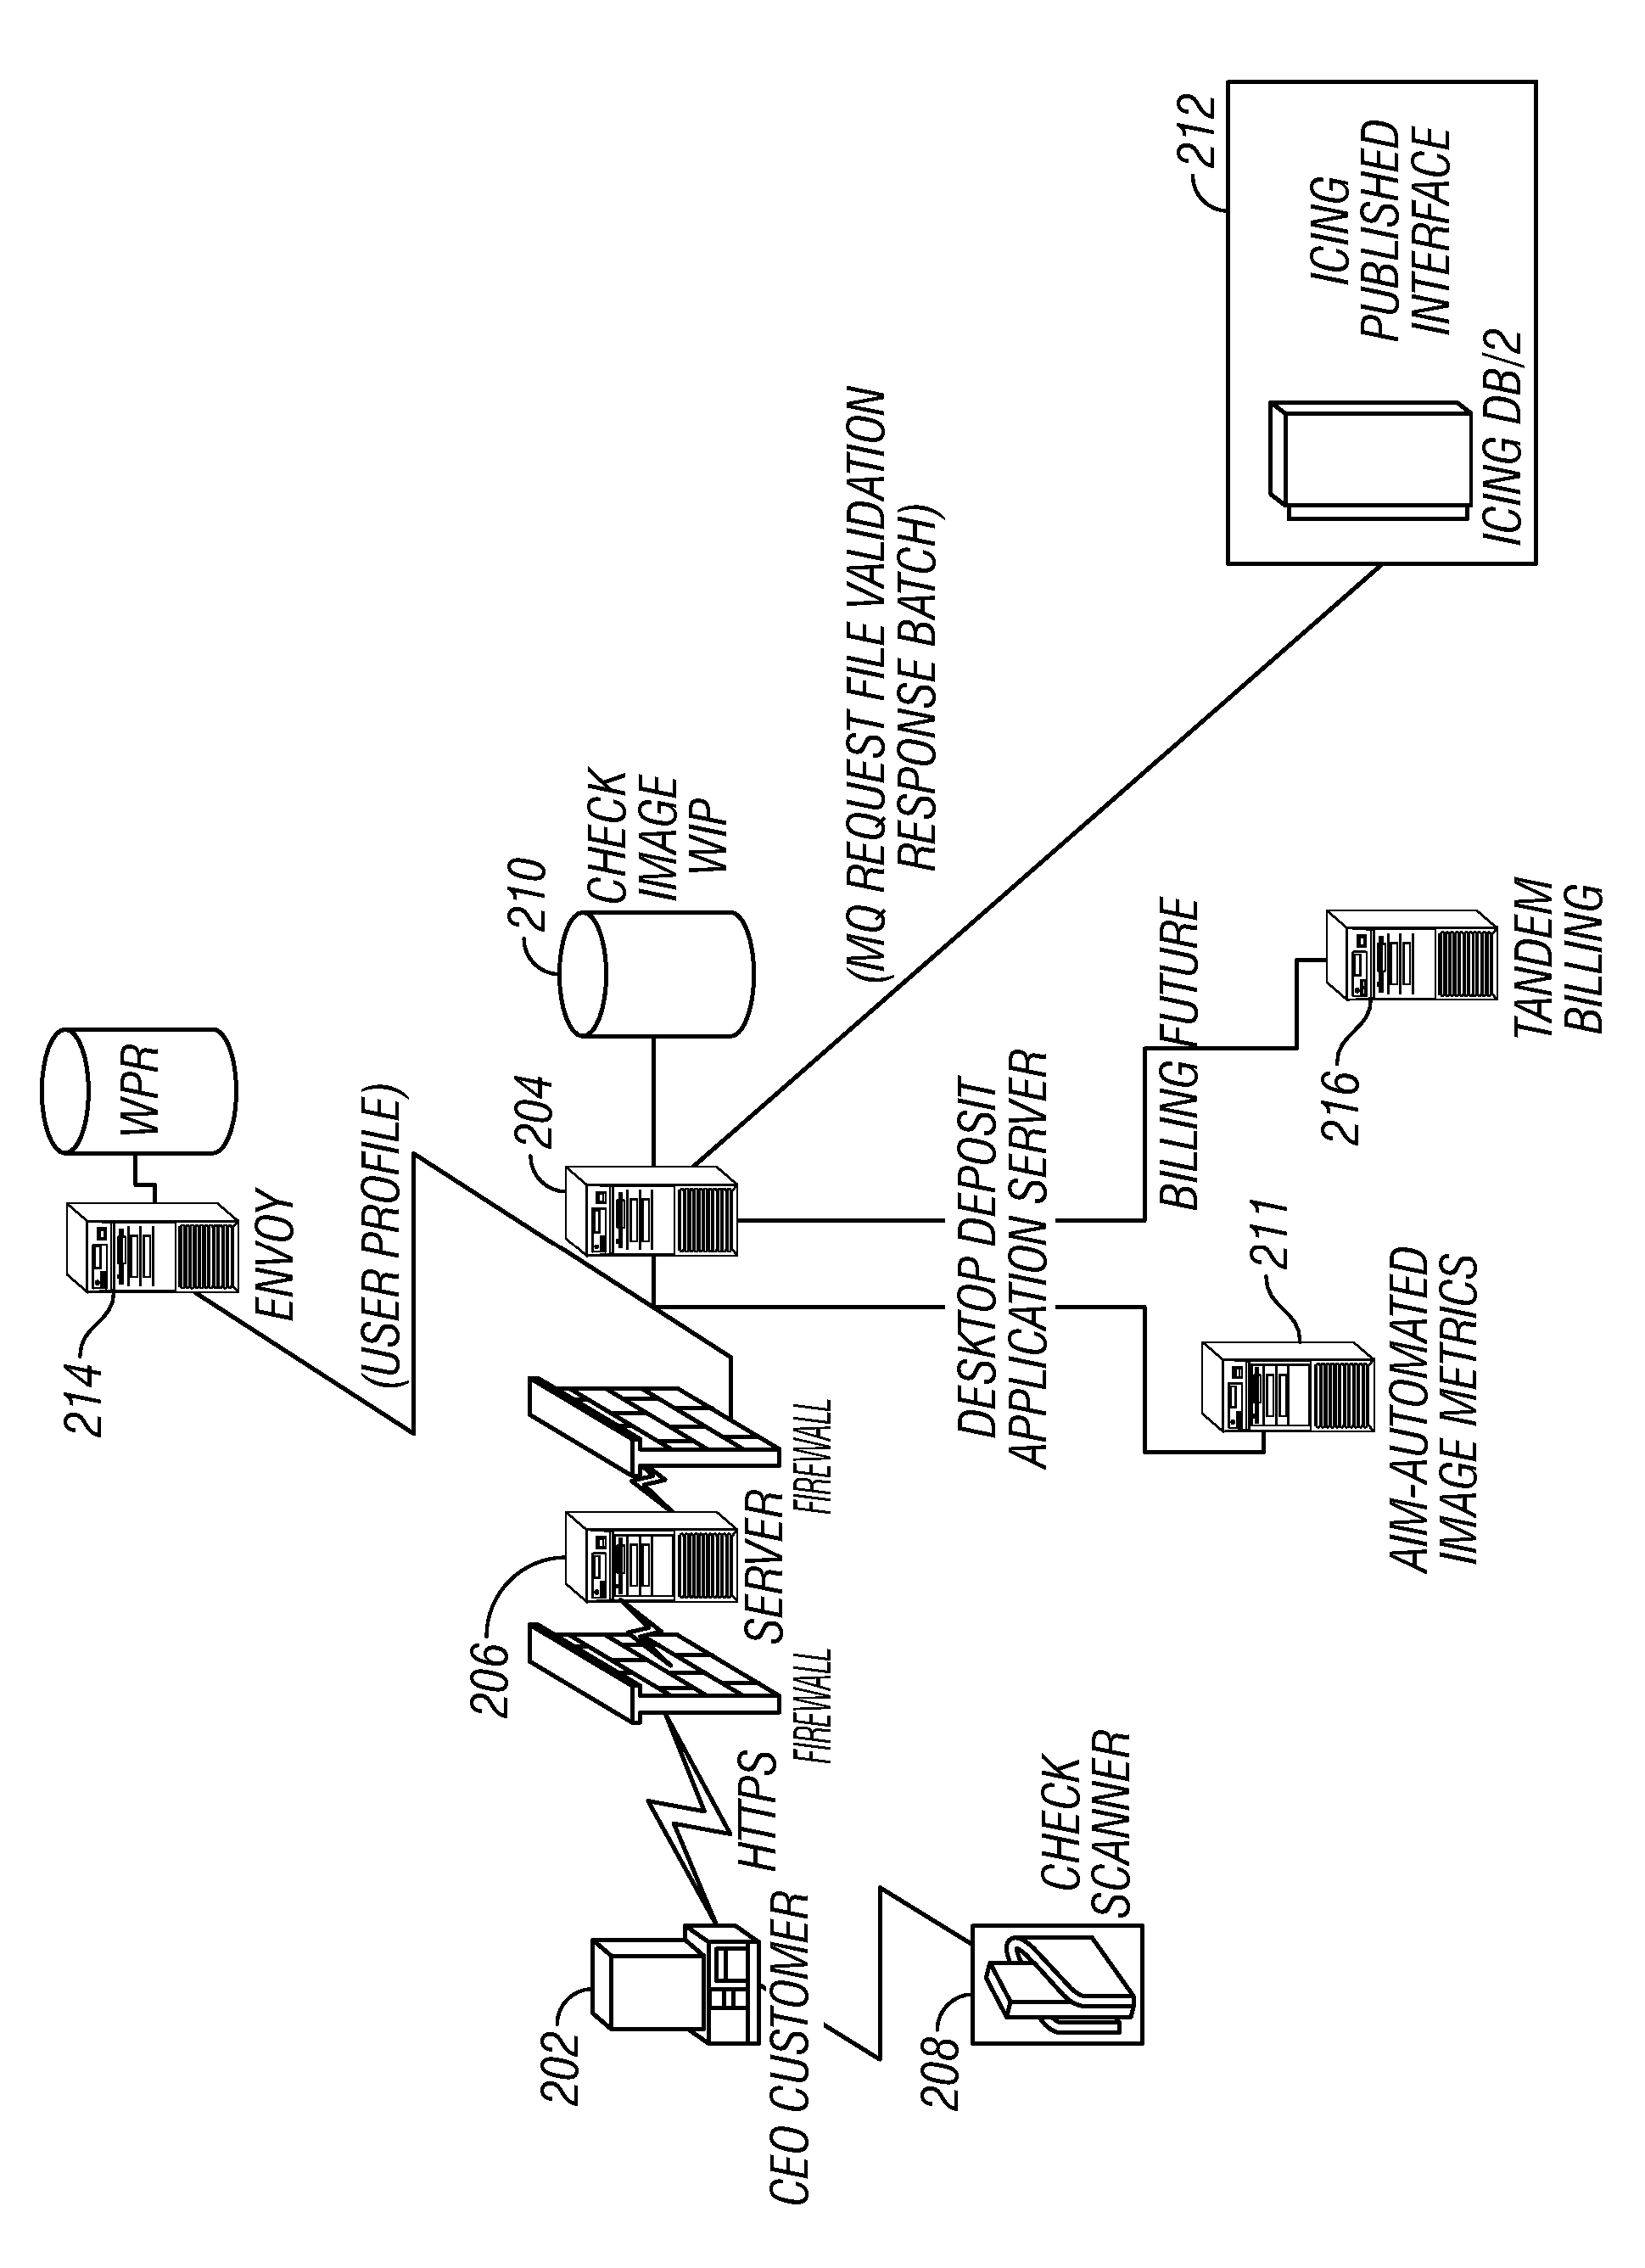 Method and apparatus for accepting check deposits via the Internet using browser-based technology